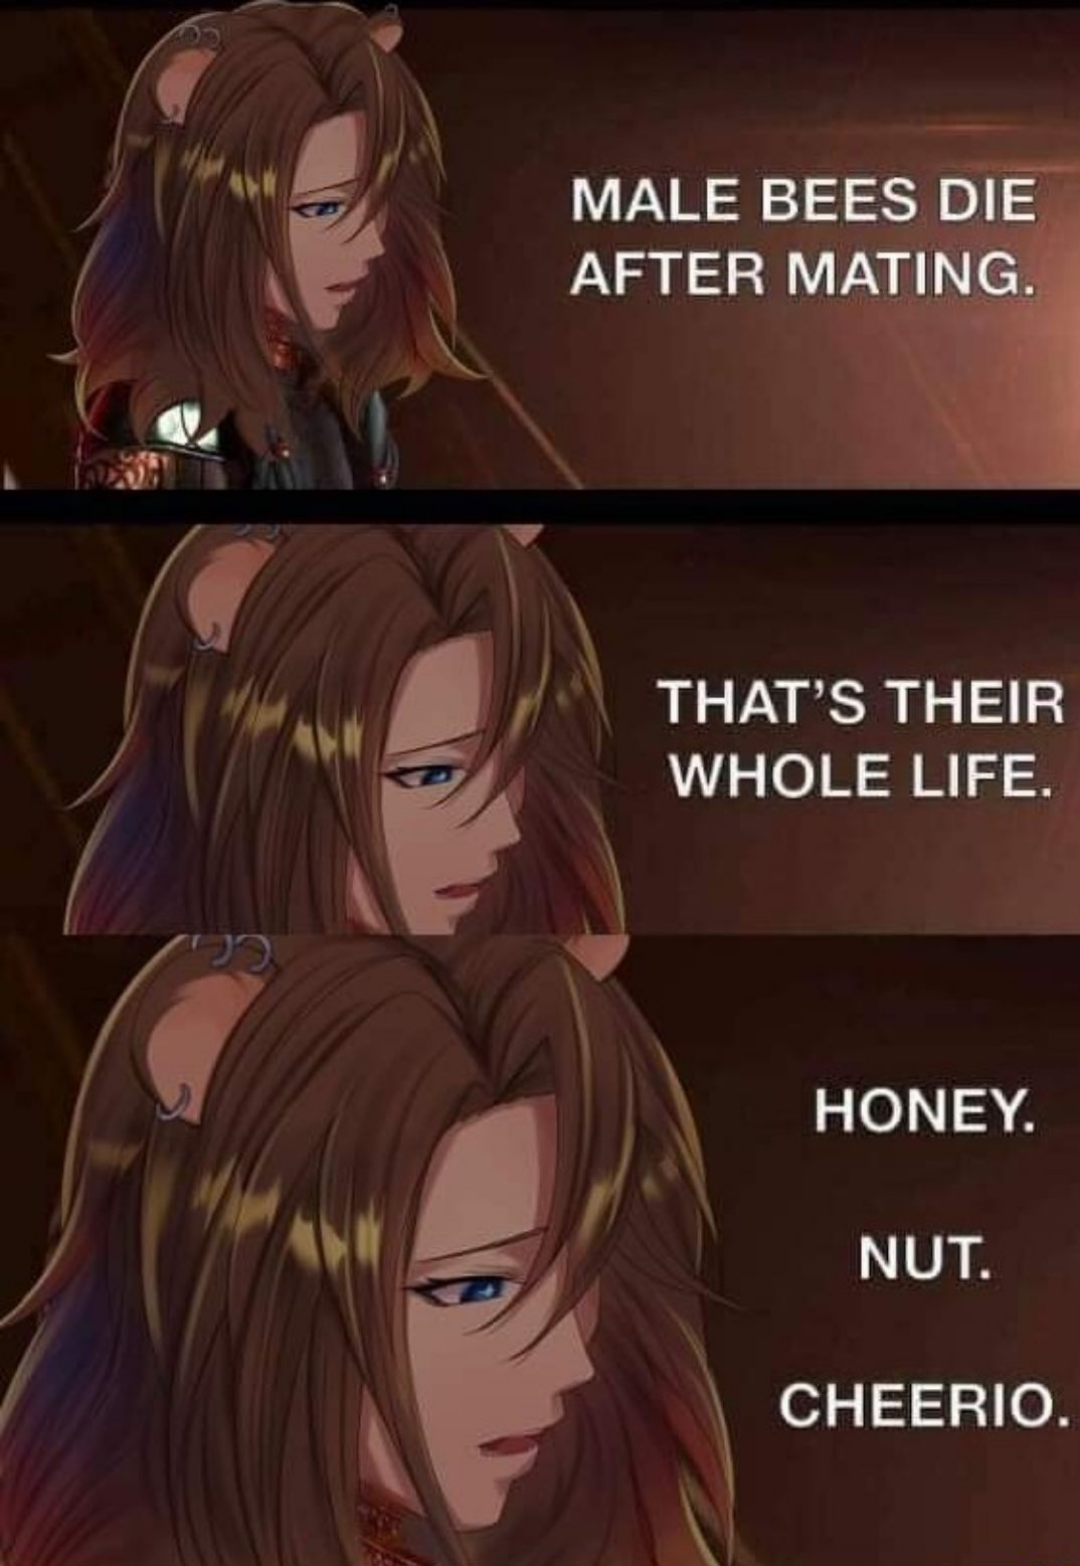 dank memes - anime - Male Bees Die After Mating. That'S Their Whole Life. Honey. Nut. Cheerio.